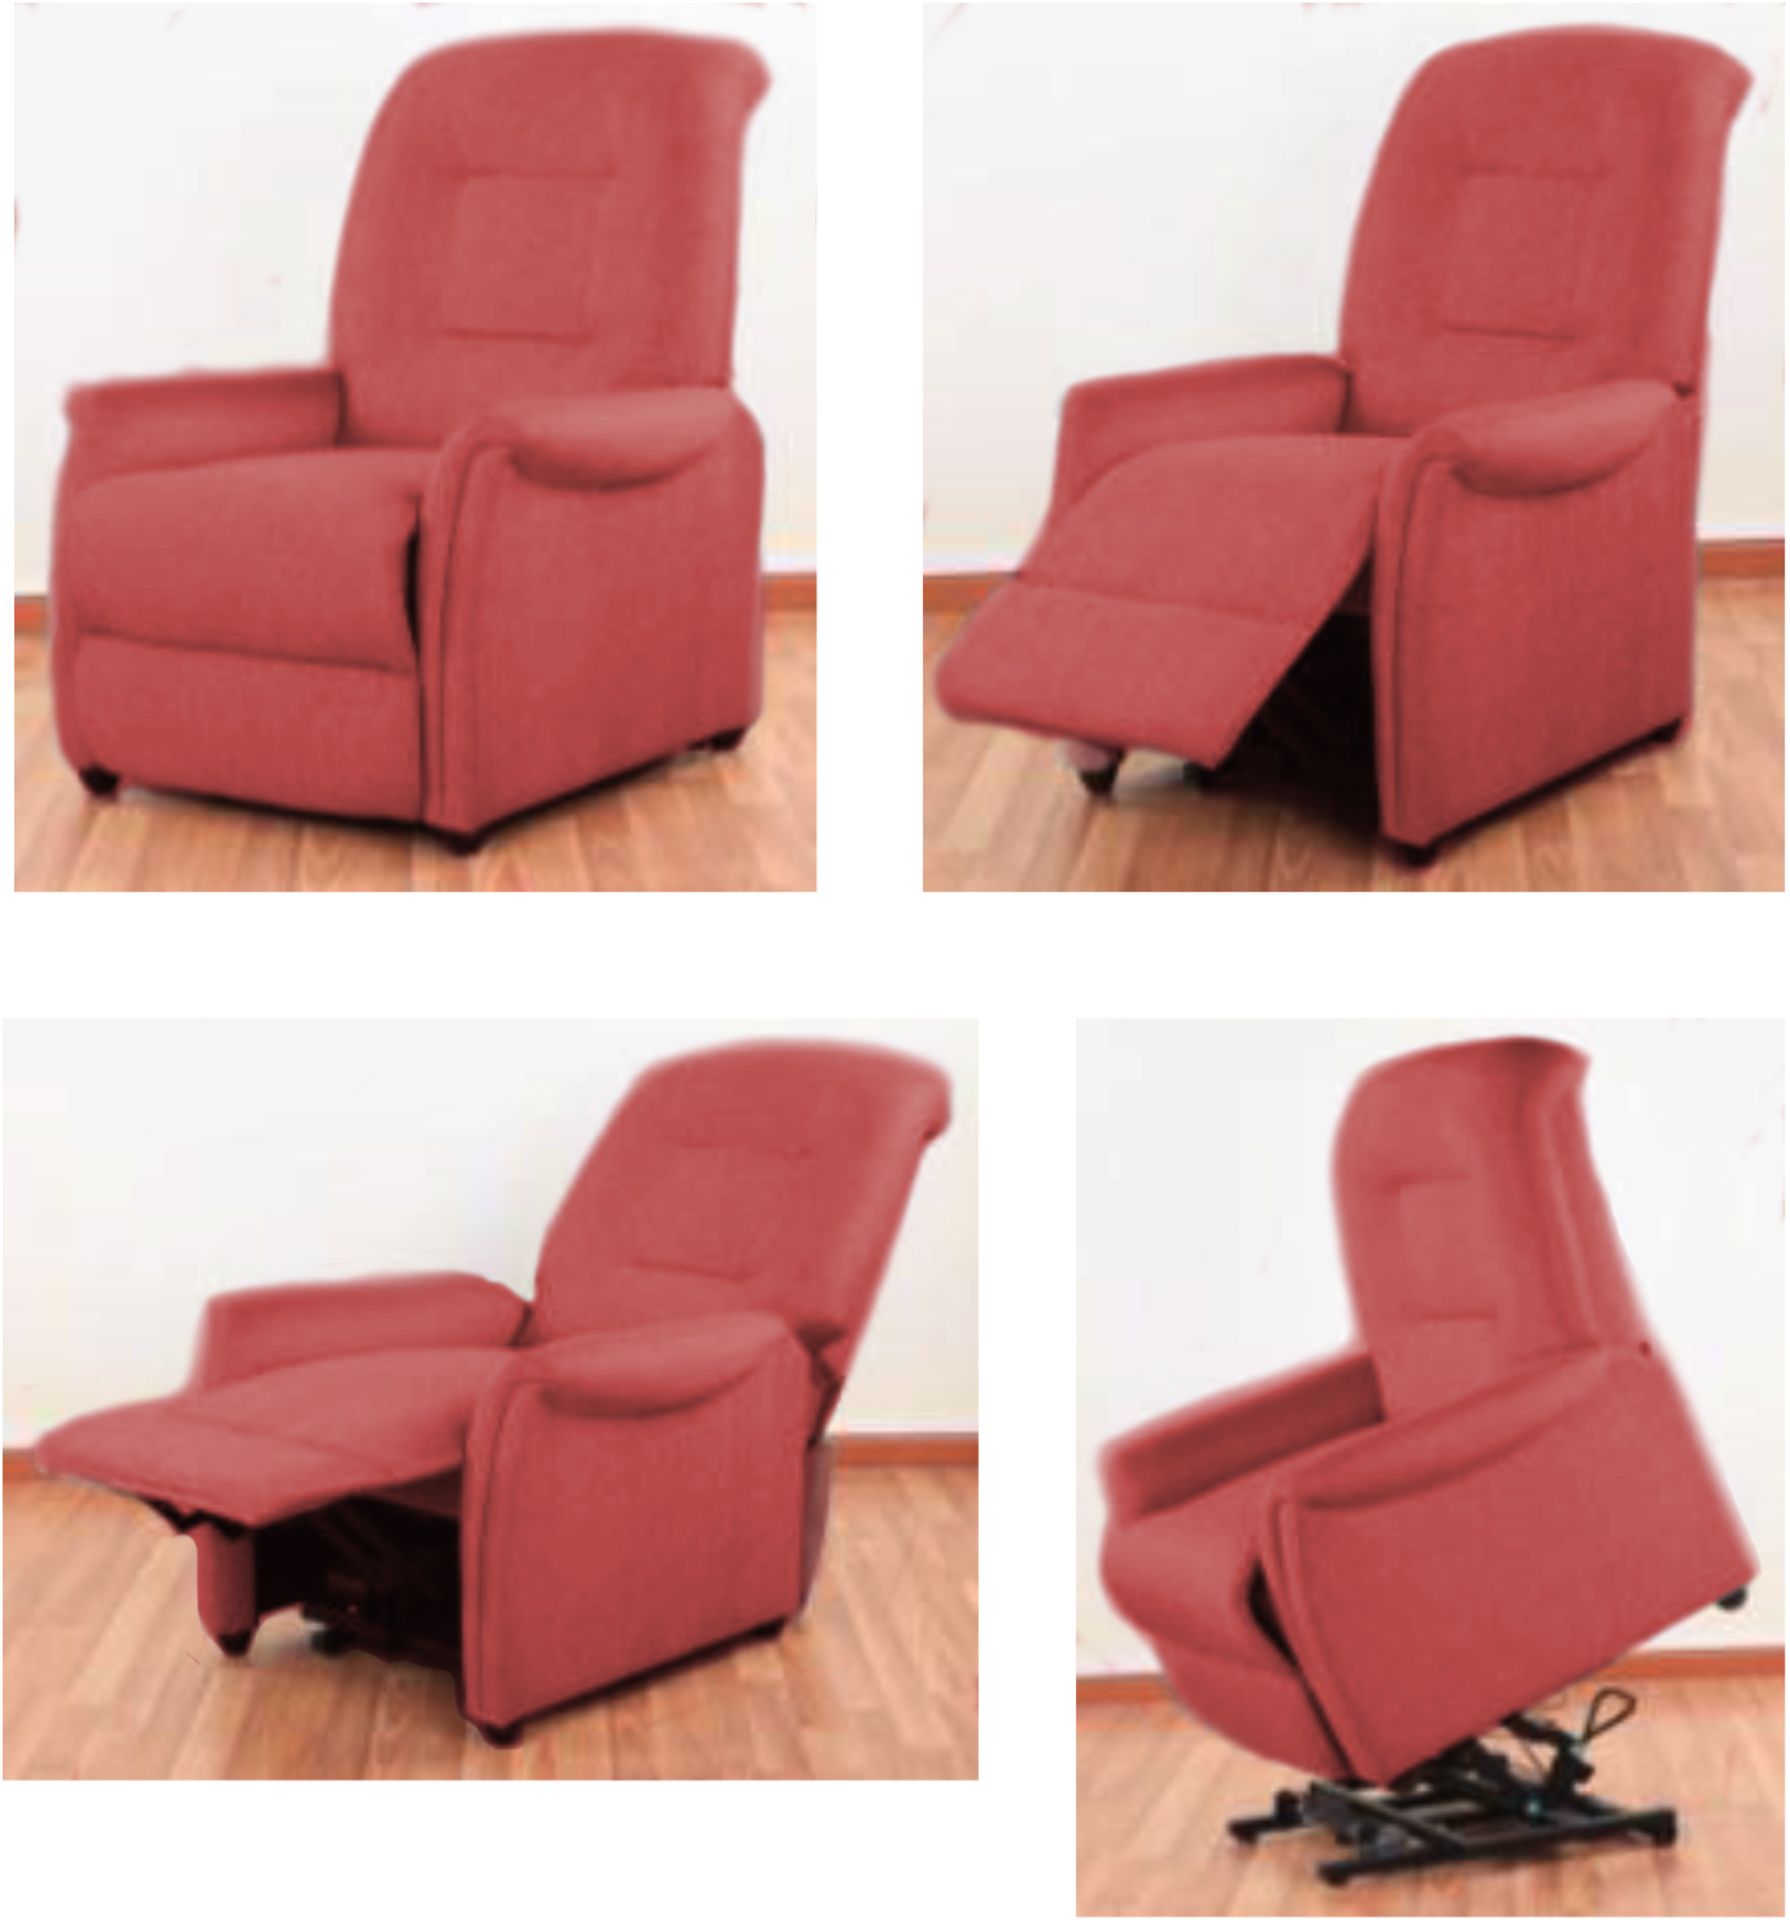 V Large Electric Rise & Recline Chair (Red) With Remote Control Brand New and Boxed